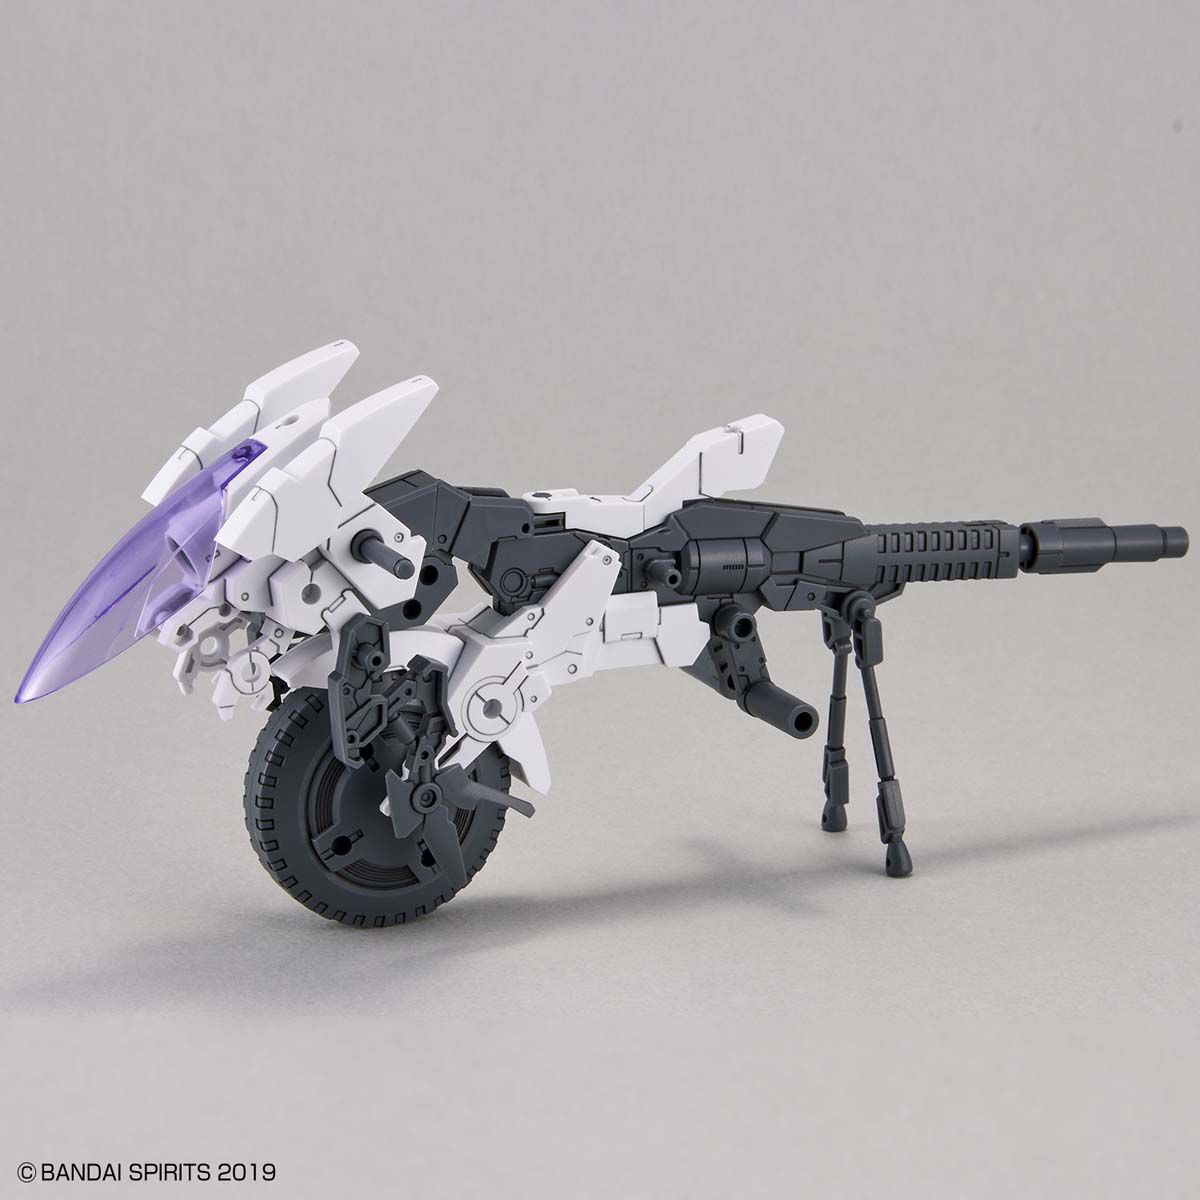 1 144 30mm extended armament vehicle cannon bike ver